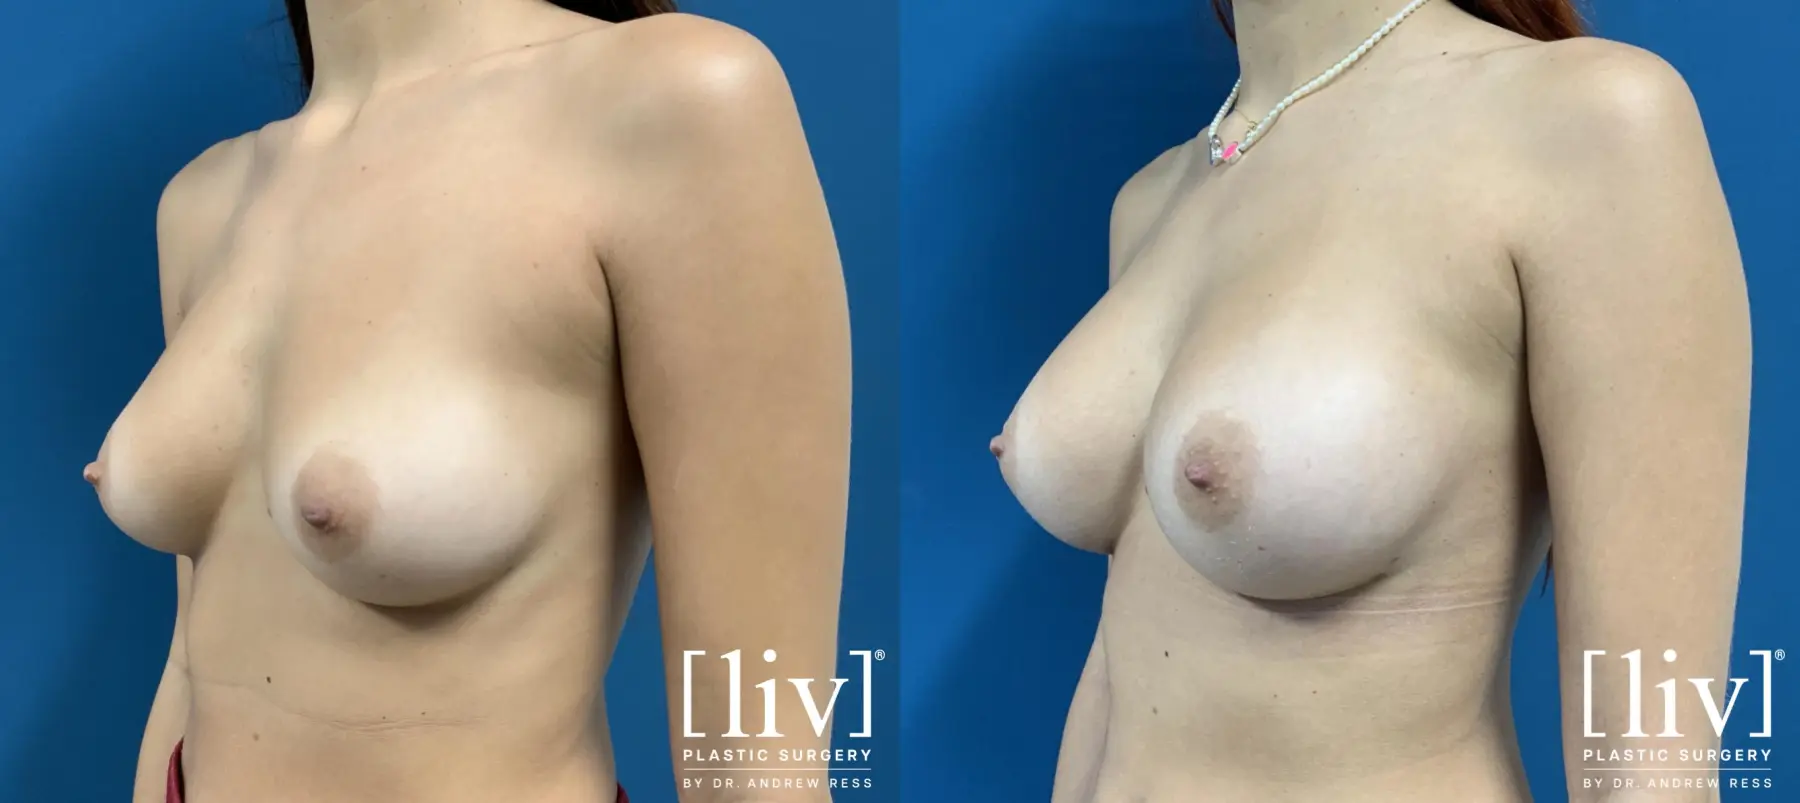 Breast Augmentation: Patient 2 - Before and After 2